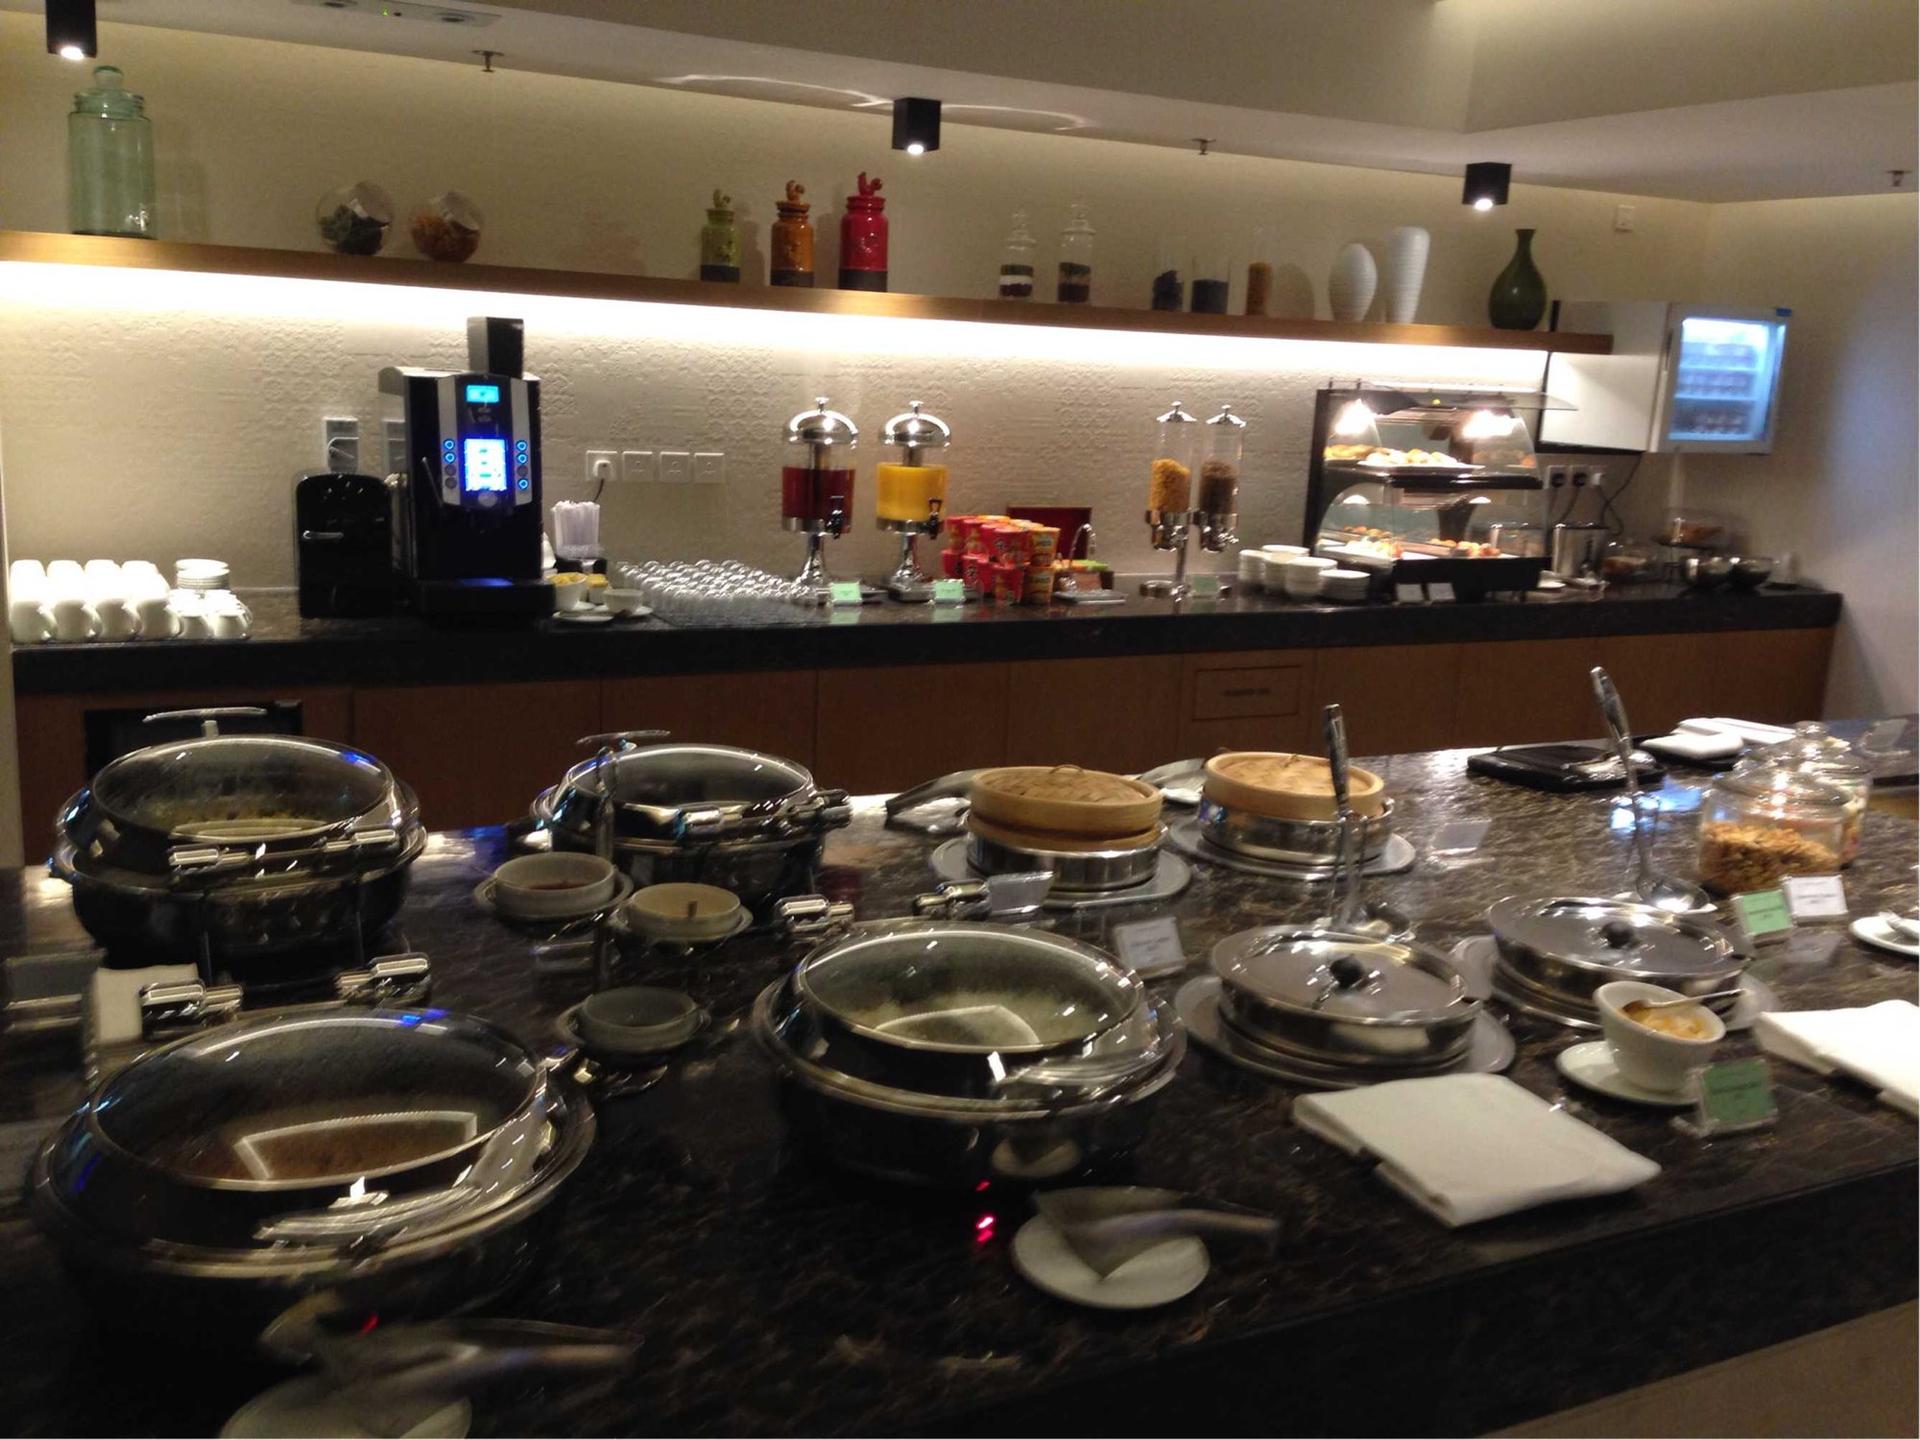 Singapore Airlines SilverKris Business Class Lounge image 63 of 68